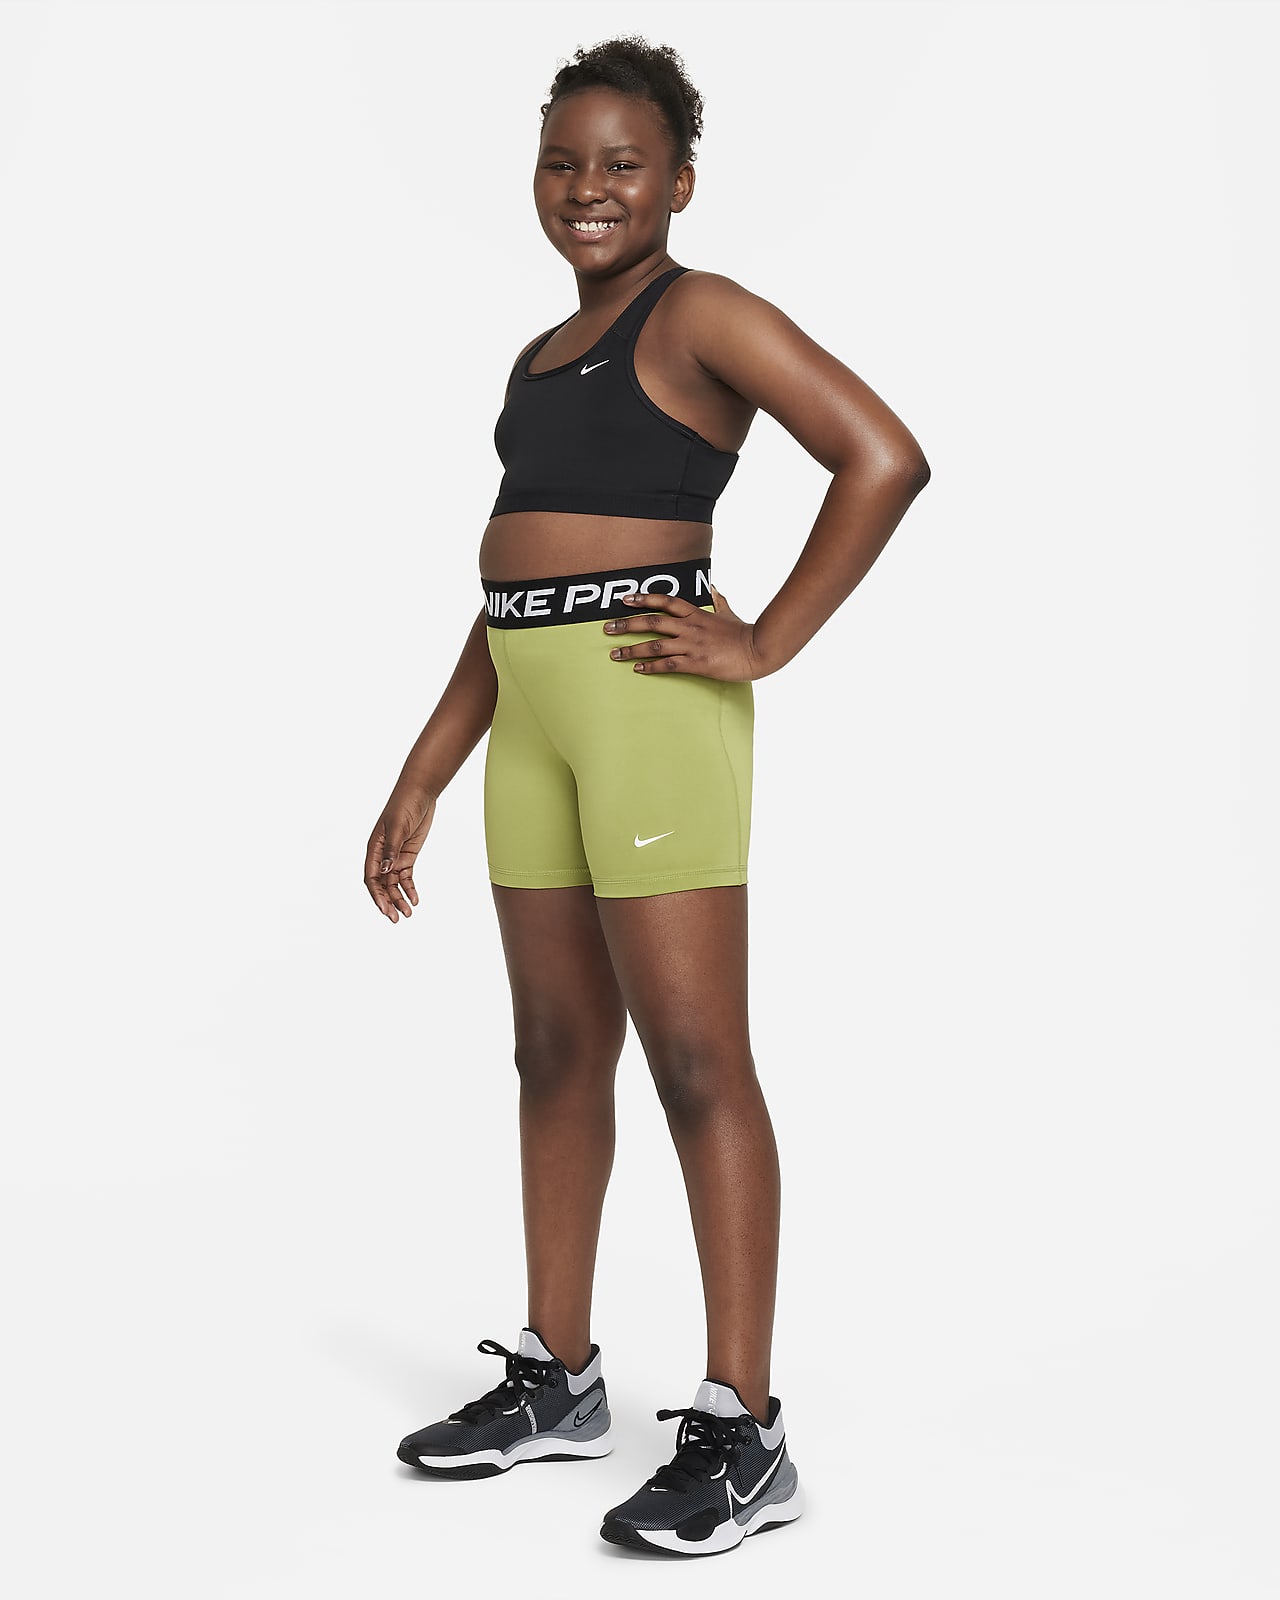 Nike Pro Shorts and Leggings. Find Men's, Women's and Kids' Styles in  Unique Offers